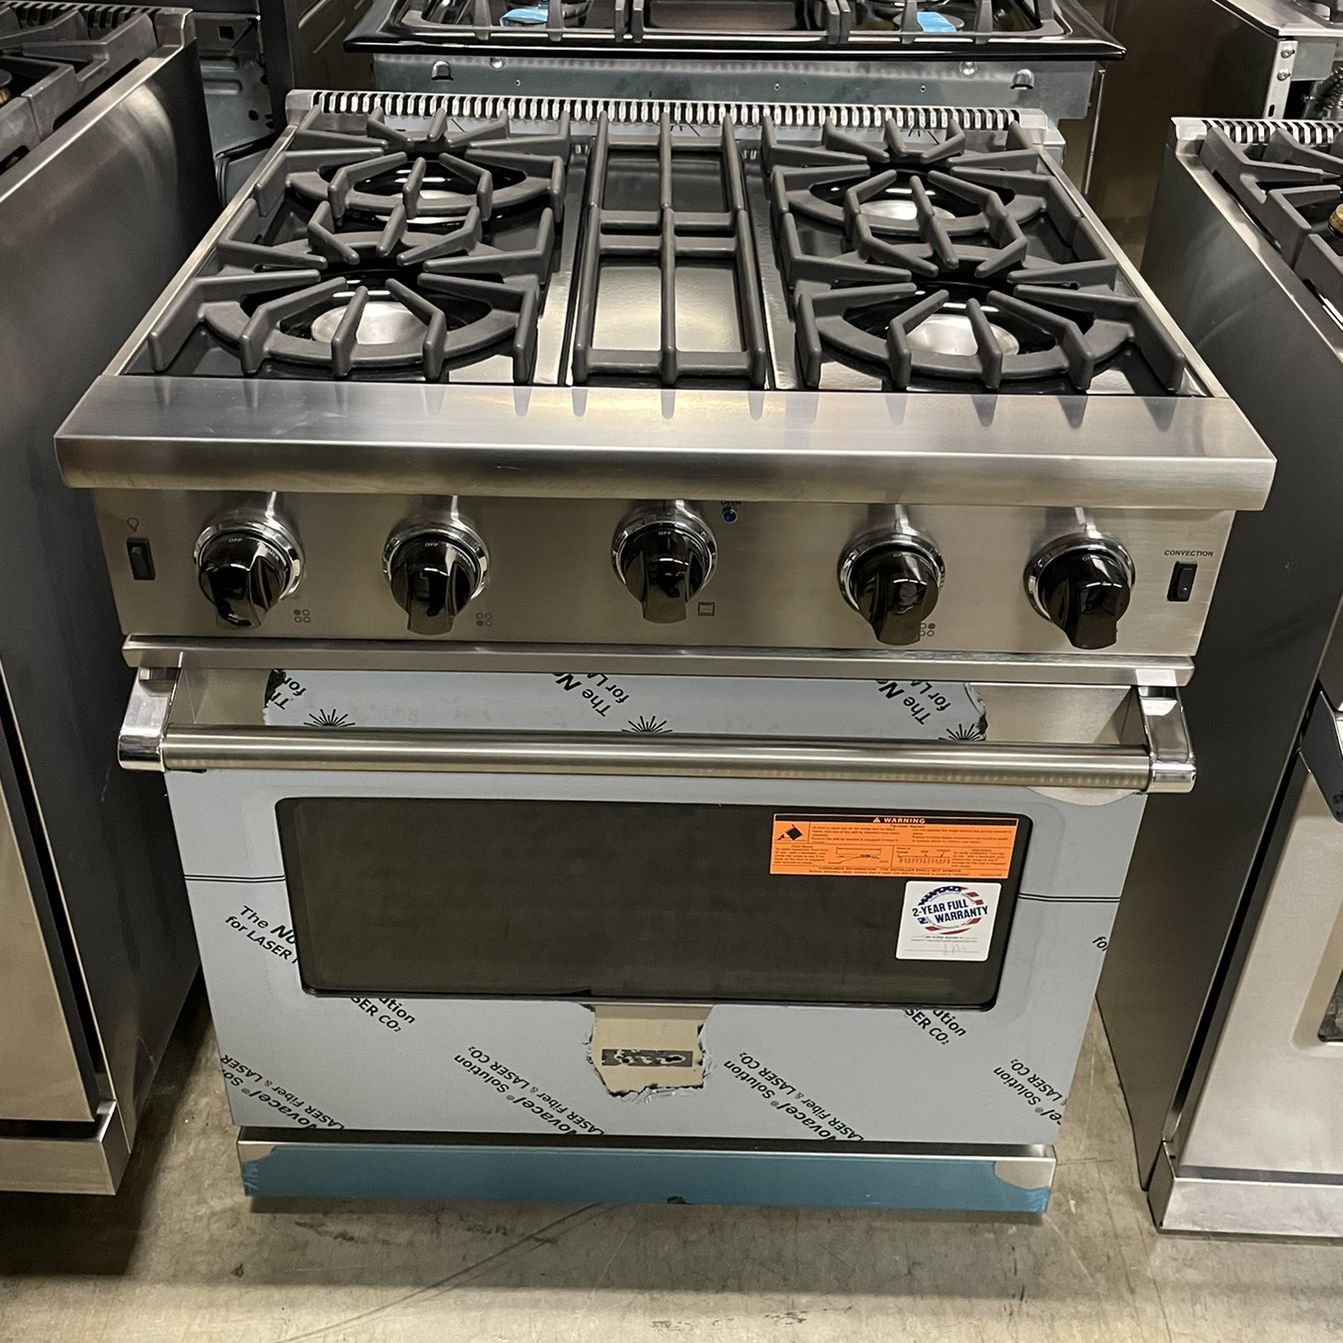 30 Inch Freestanding Professional Gas Range with 4 Open Burners, 4 Cu. Ft. Oven Capacity, Continuous Grates, Manual Clean, SureSpark™ Ignition System,